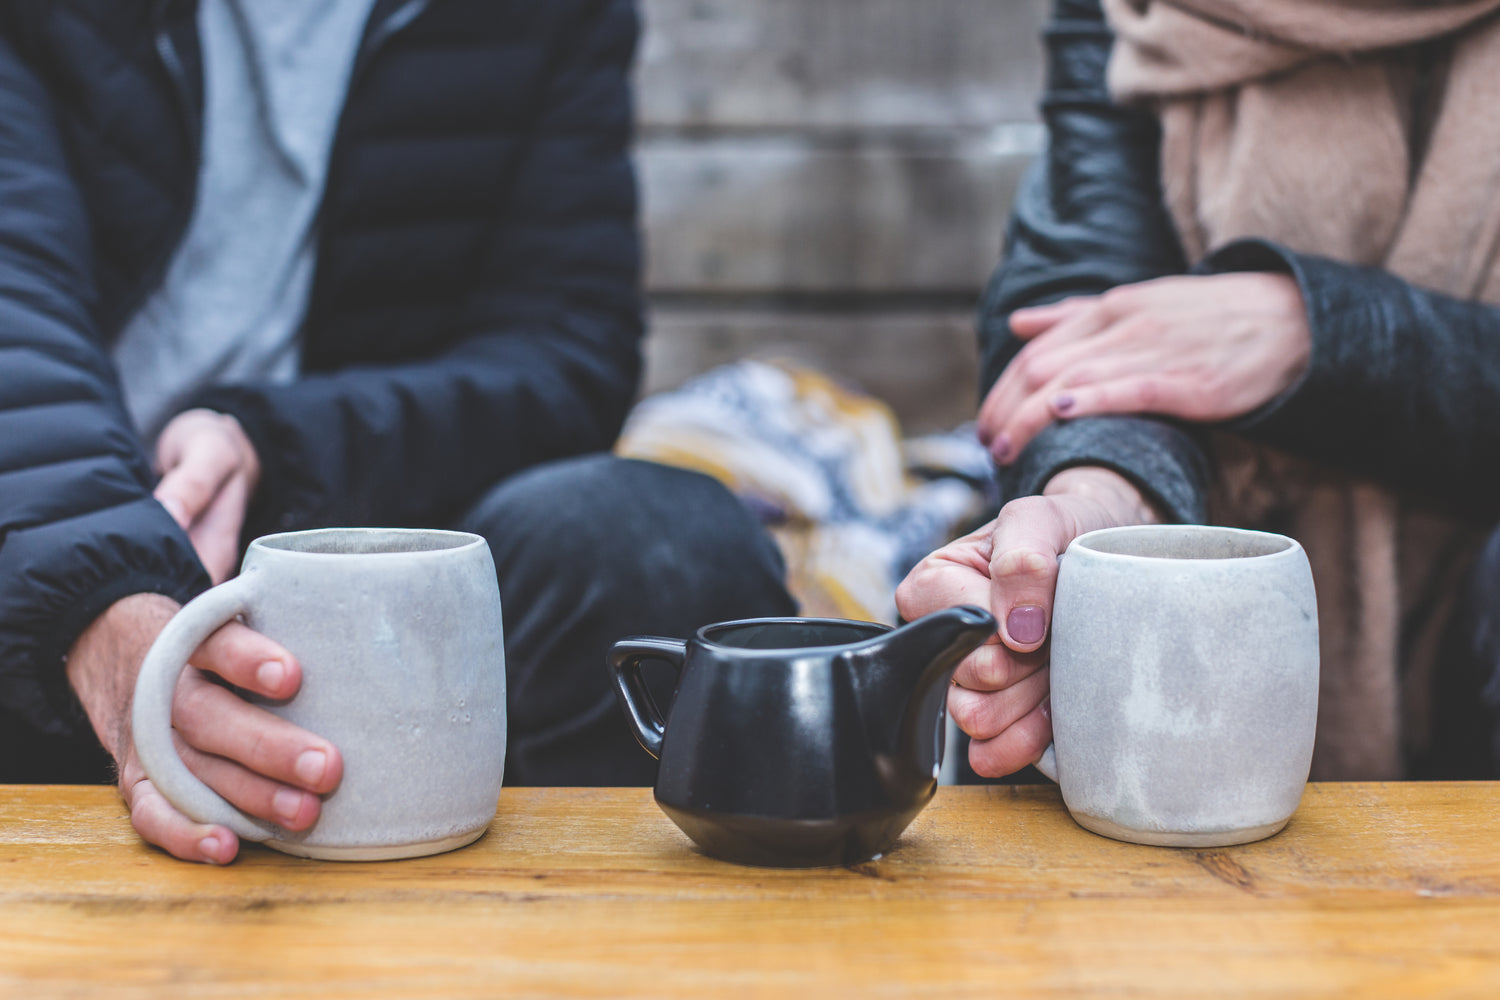 Two Persons Enjoying A Conversation With A Coffee